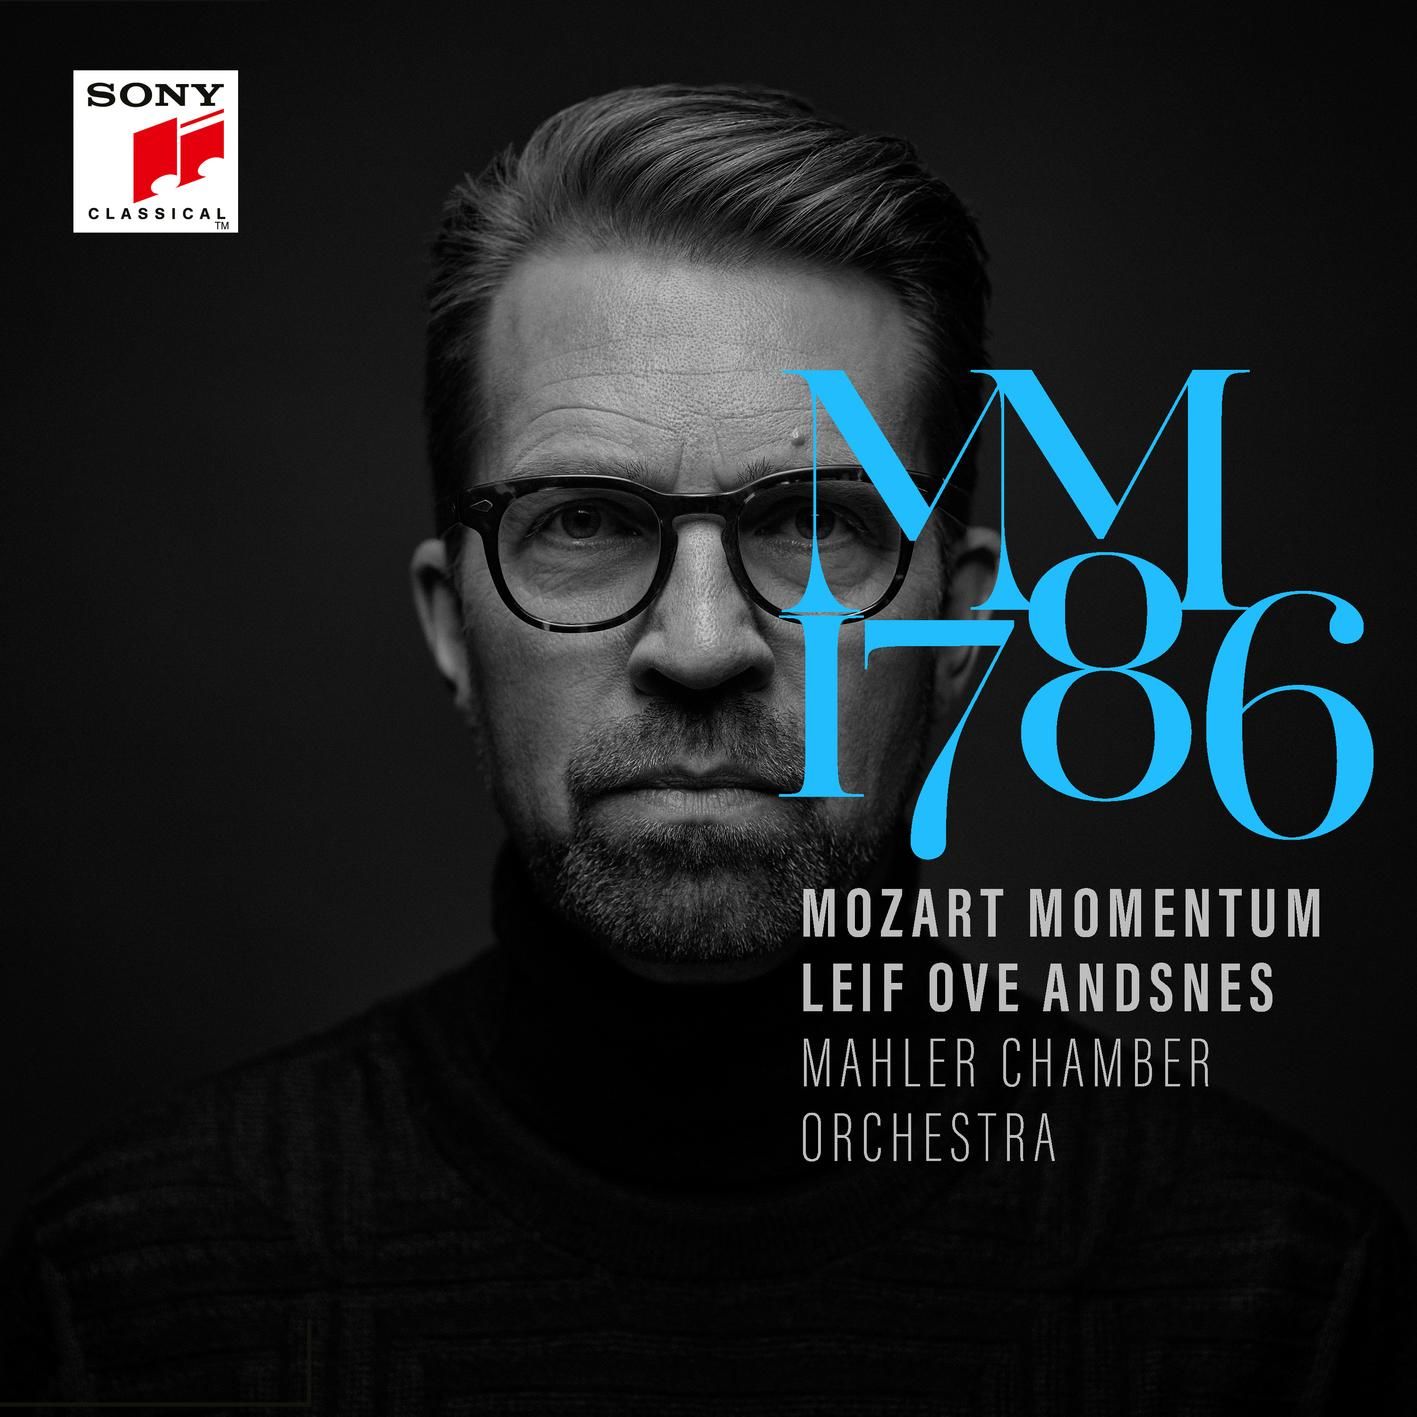 1786 Mozart Momentum - Leif Ove Andsnes - Sony Classical CD 1 of 2 24-96